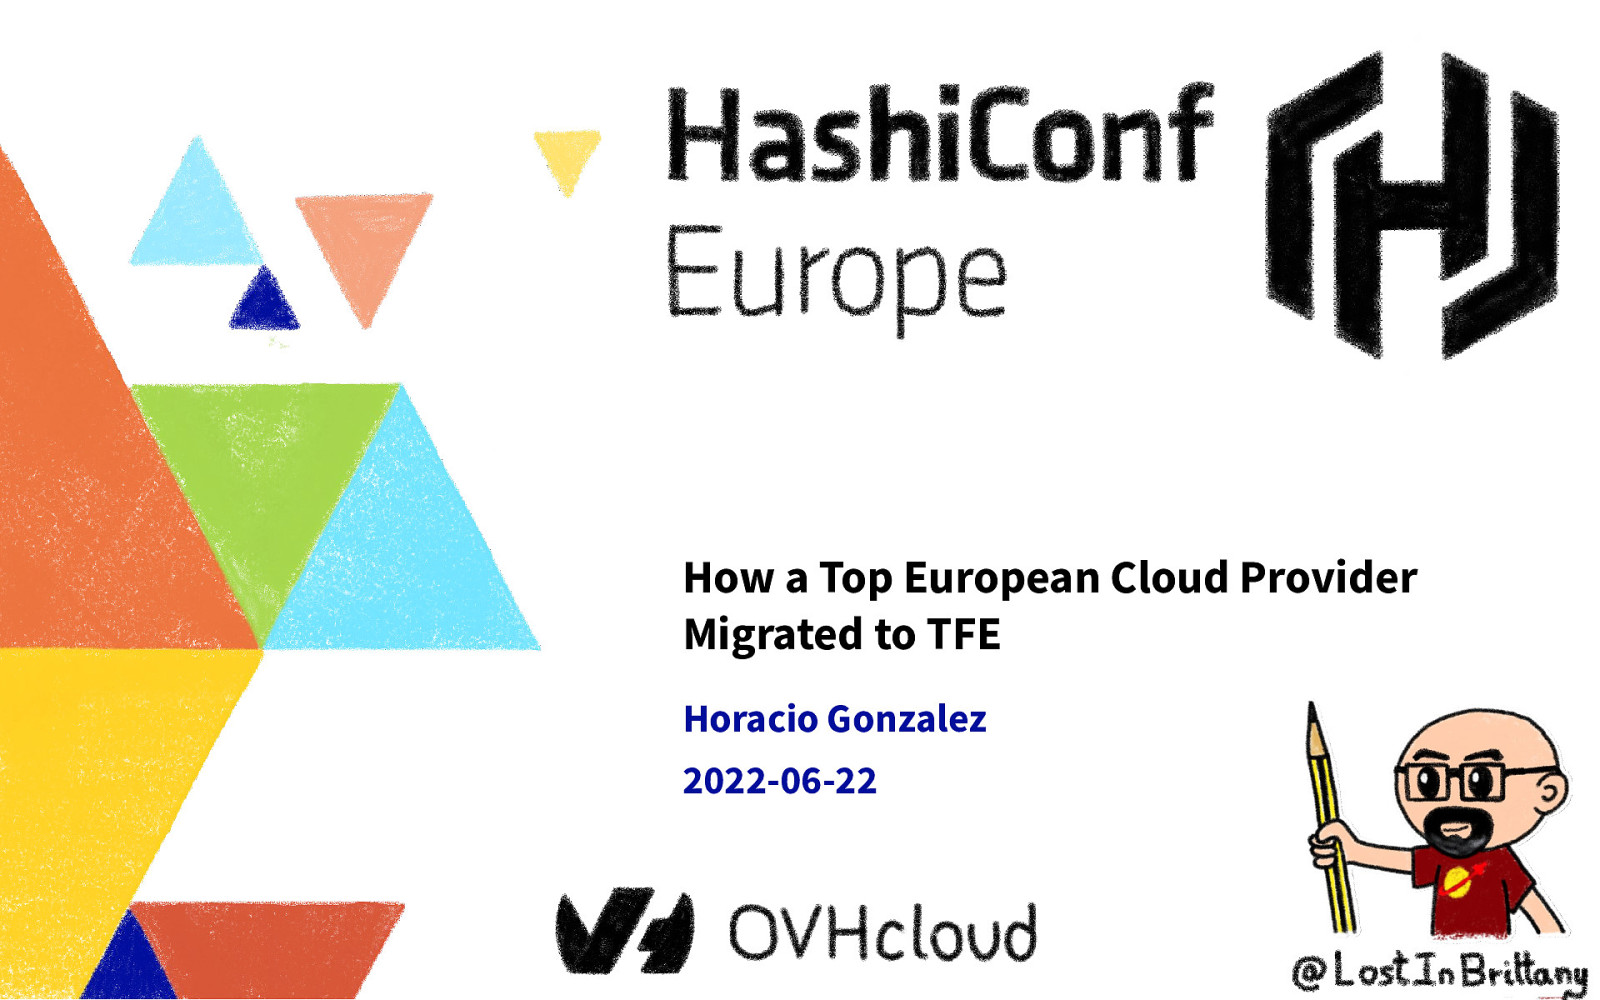 How a Top European Cloud Provider Migrated to TFE